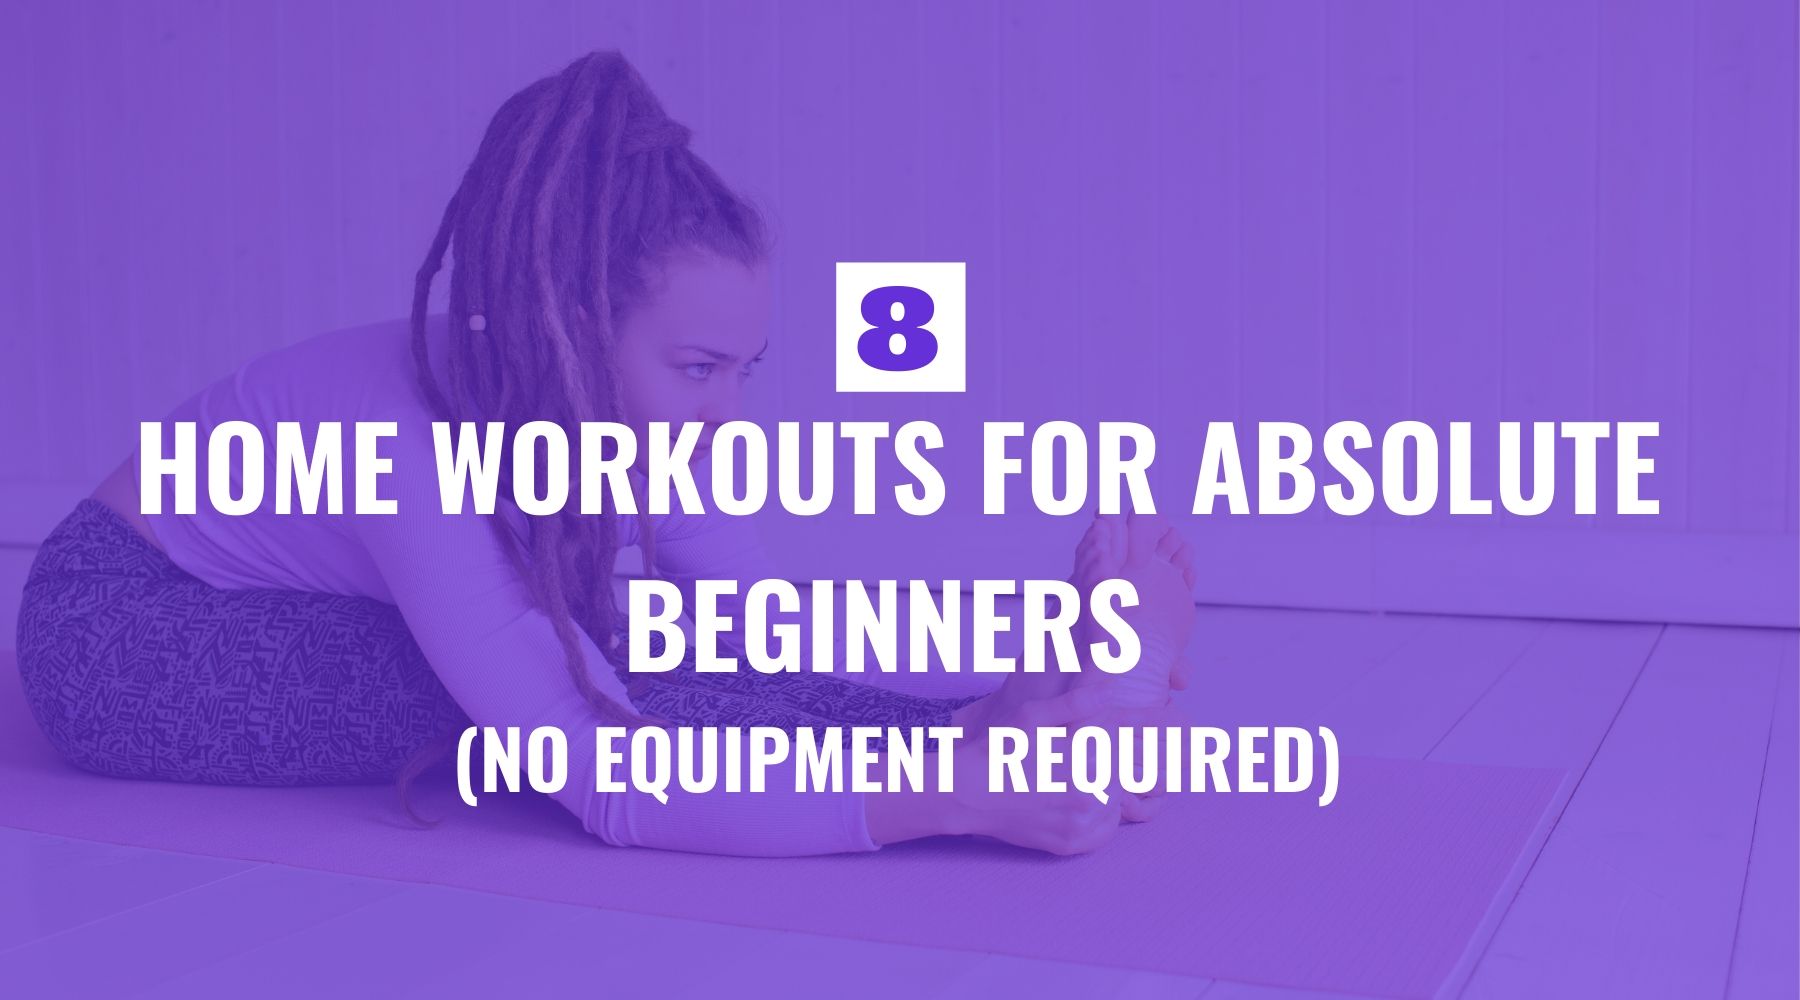 8 At Home Workouts for Absolute Beginners (No Equipment Required)